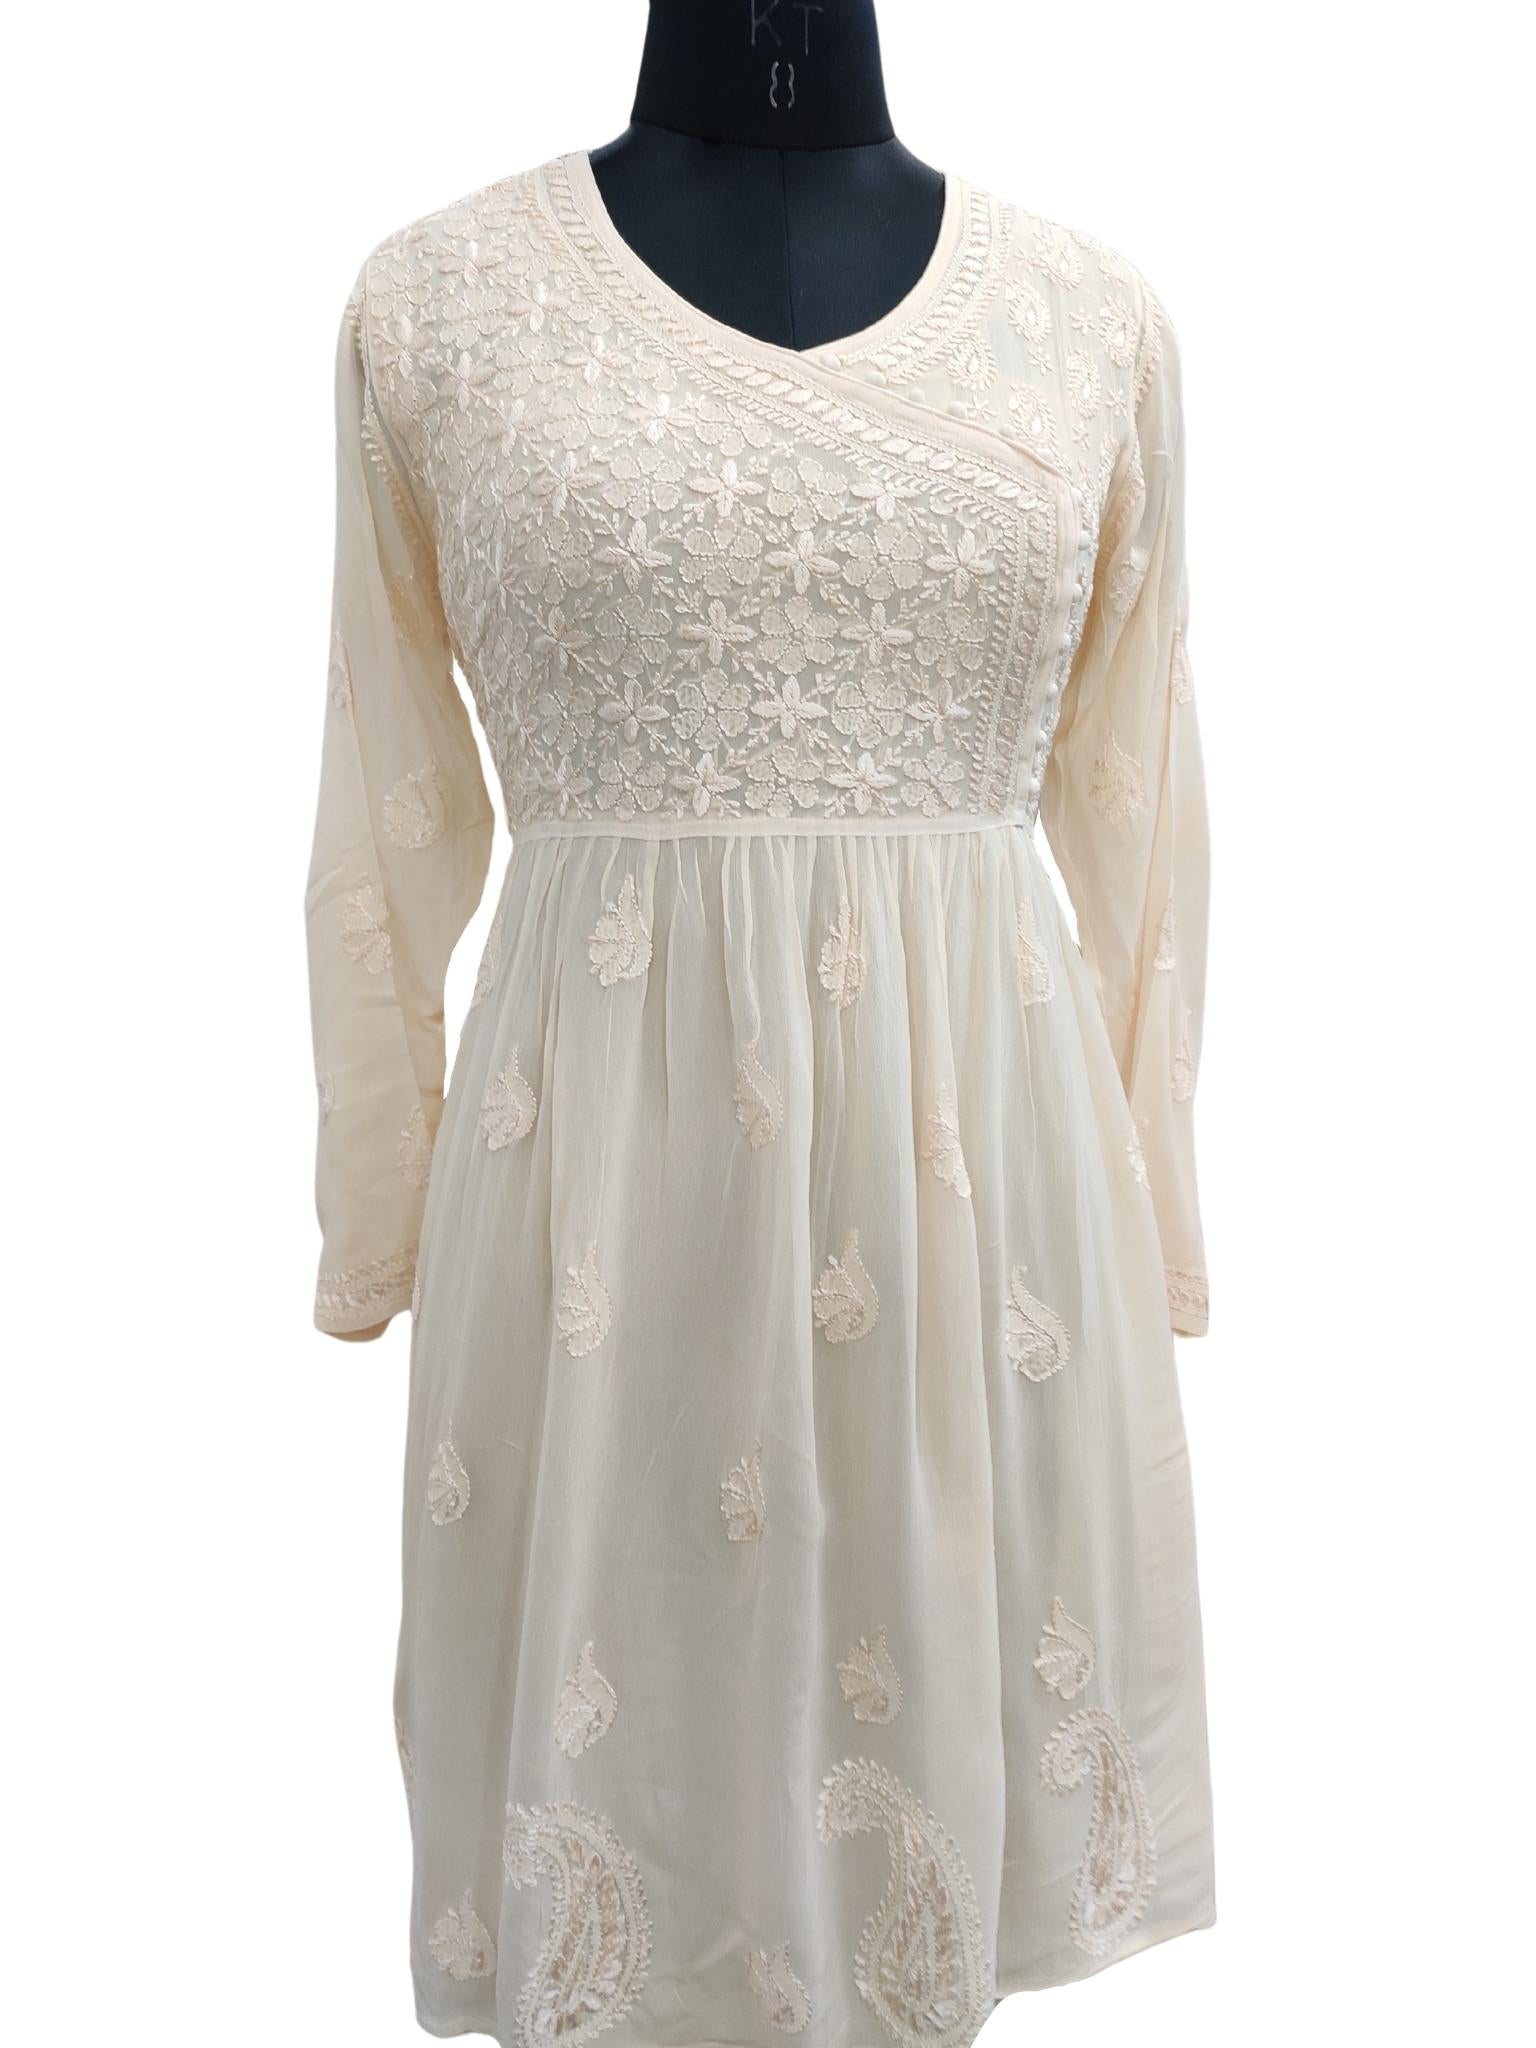 Shyamal Chikan Hand Embroidered Fawn Viscose Georgette Lucknowi Chikankari Angrakh Short Top - S17813